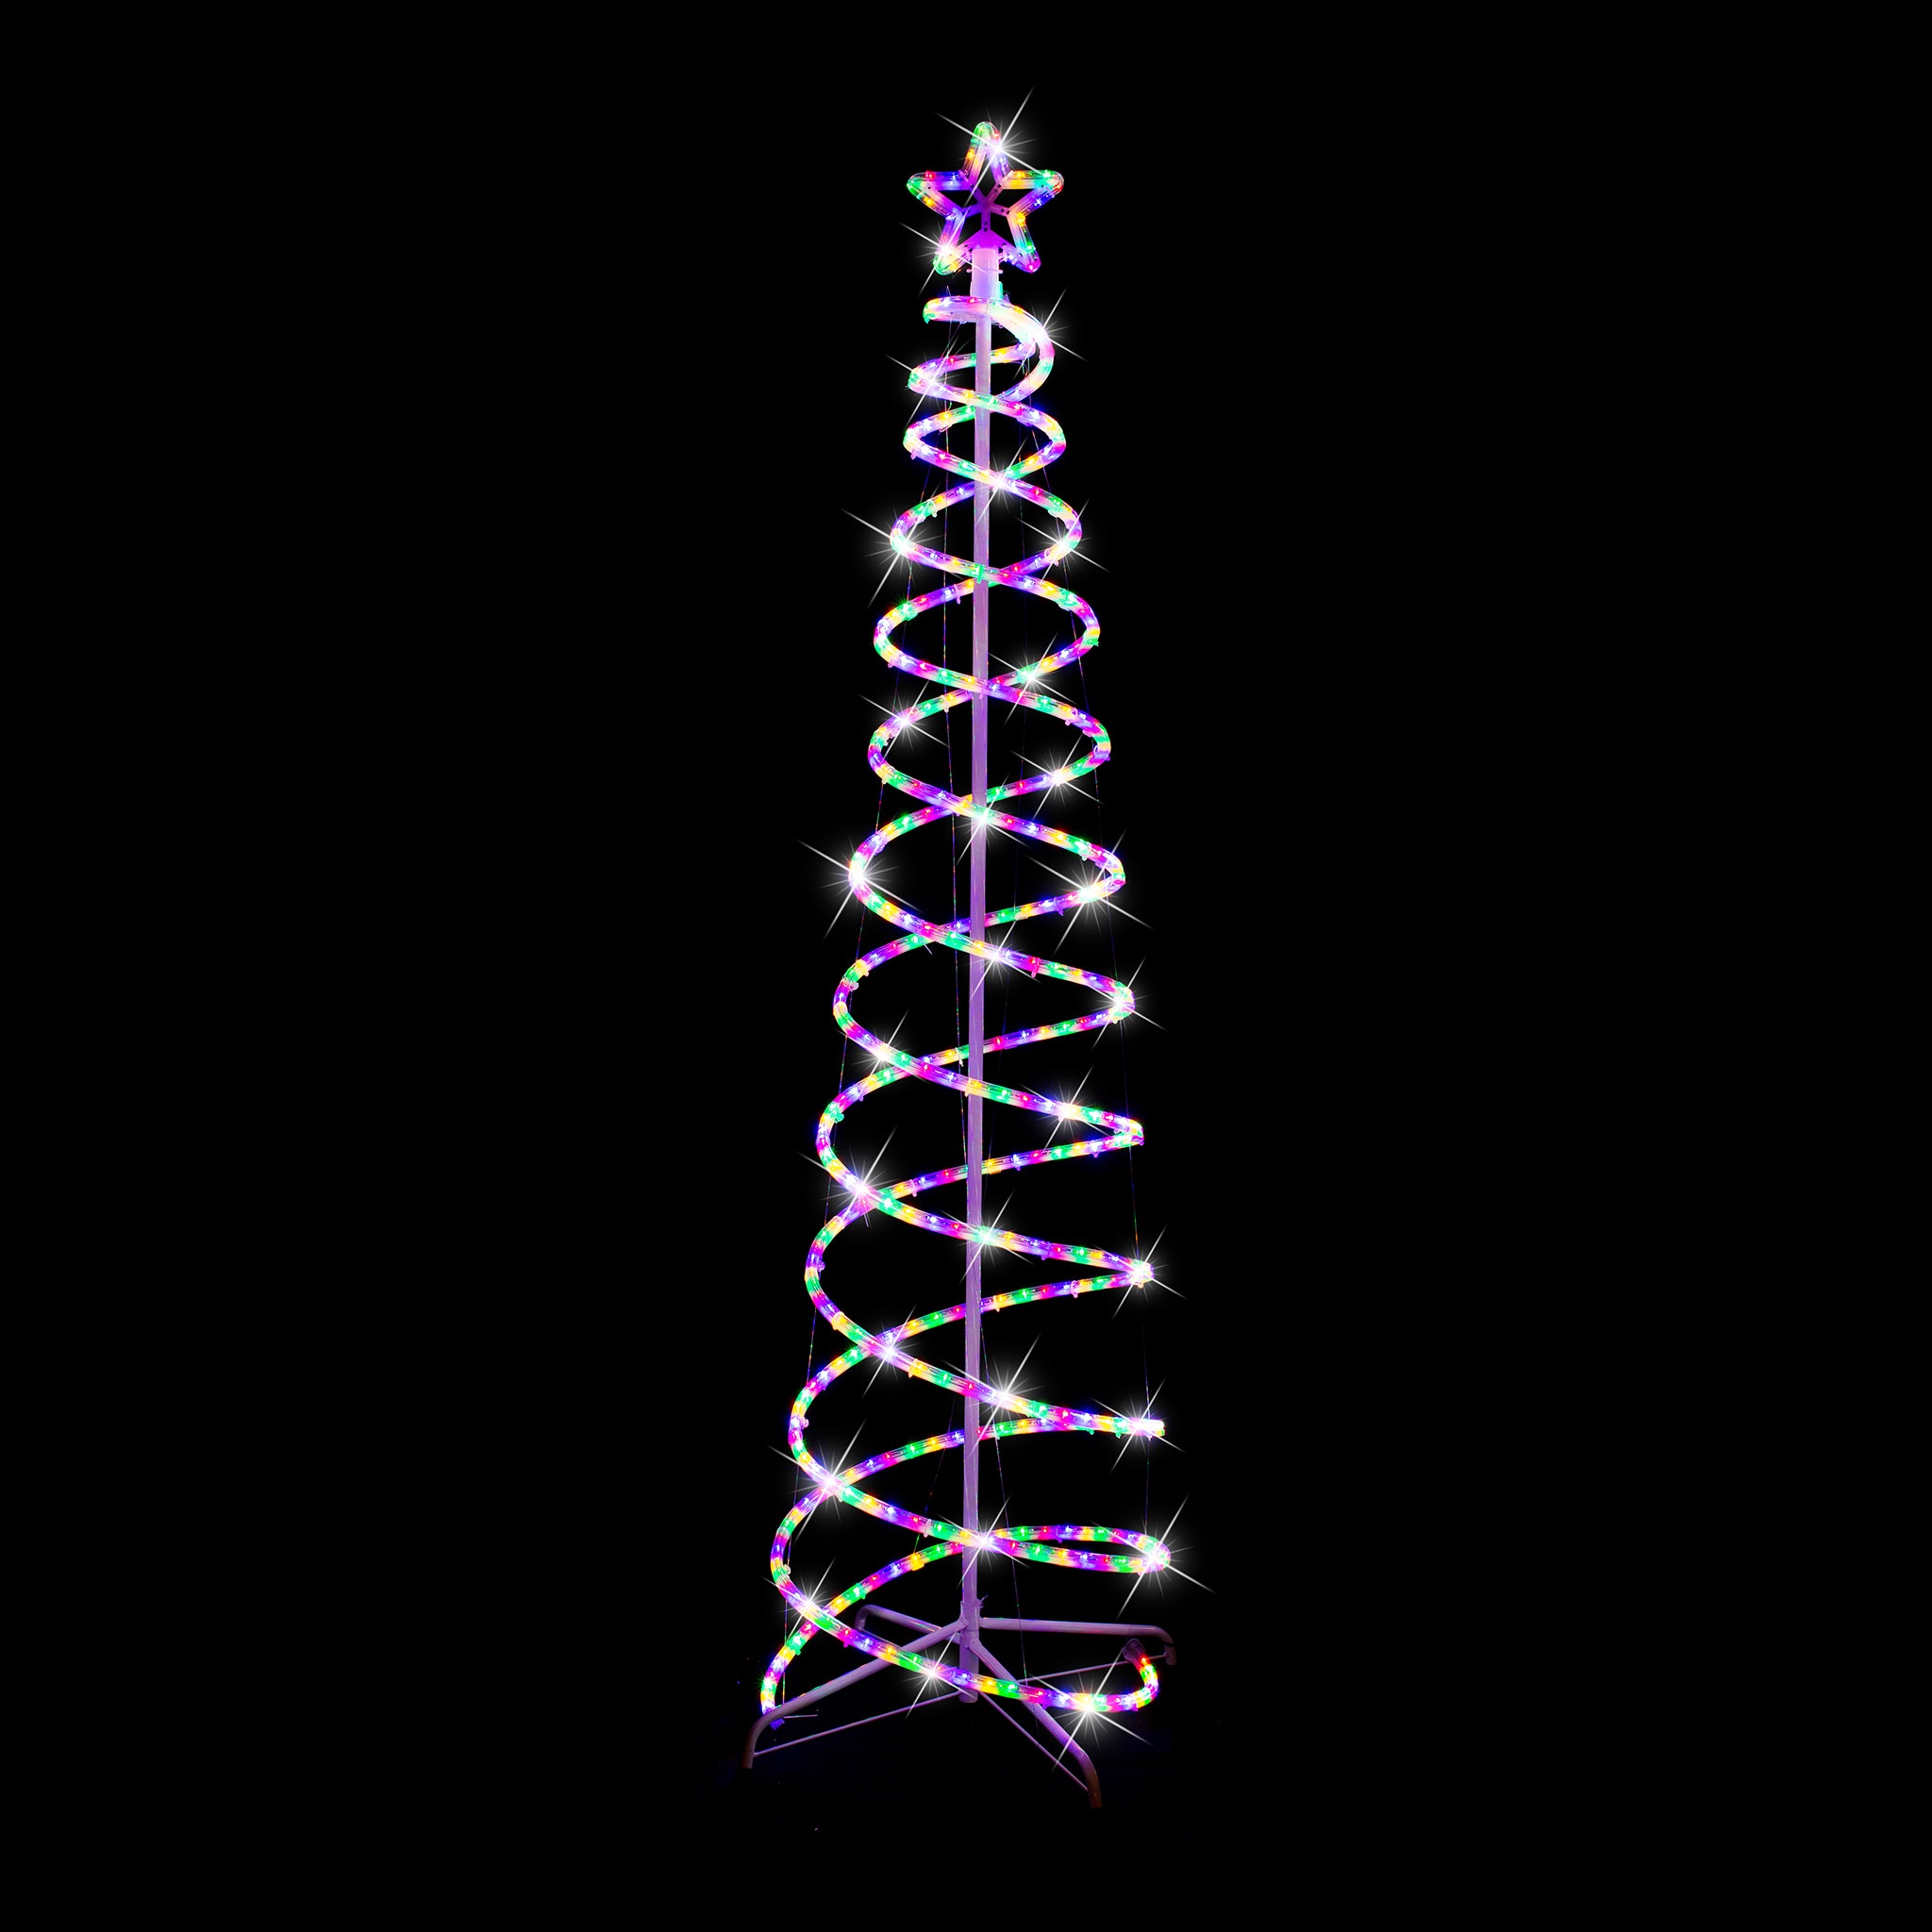 LED Rope Light double Spiral Tree (1.8m)